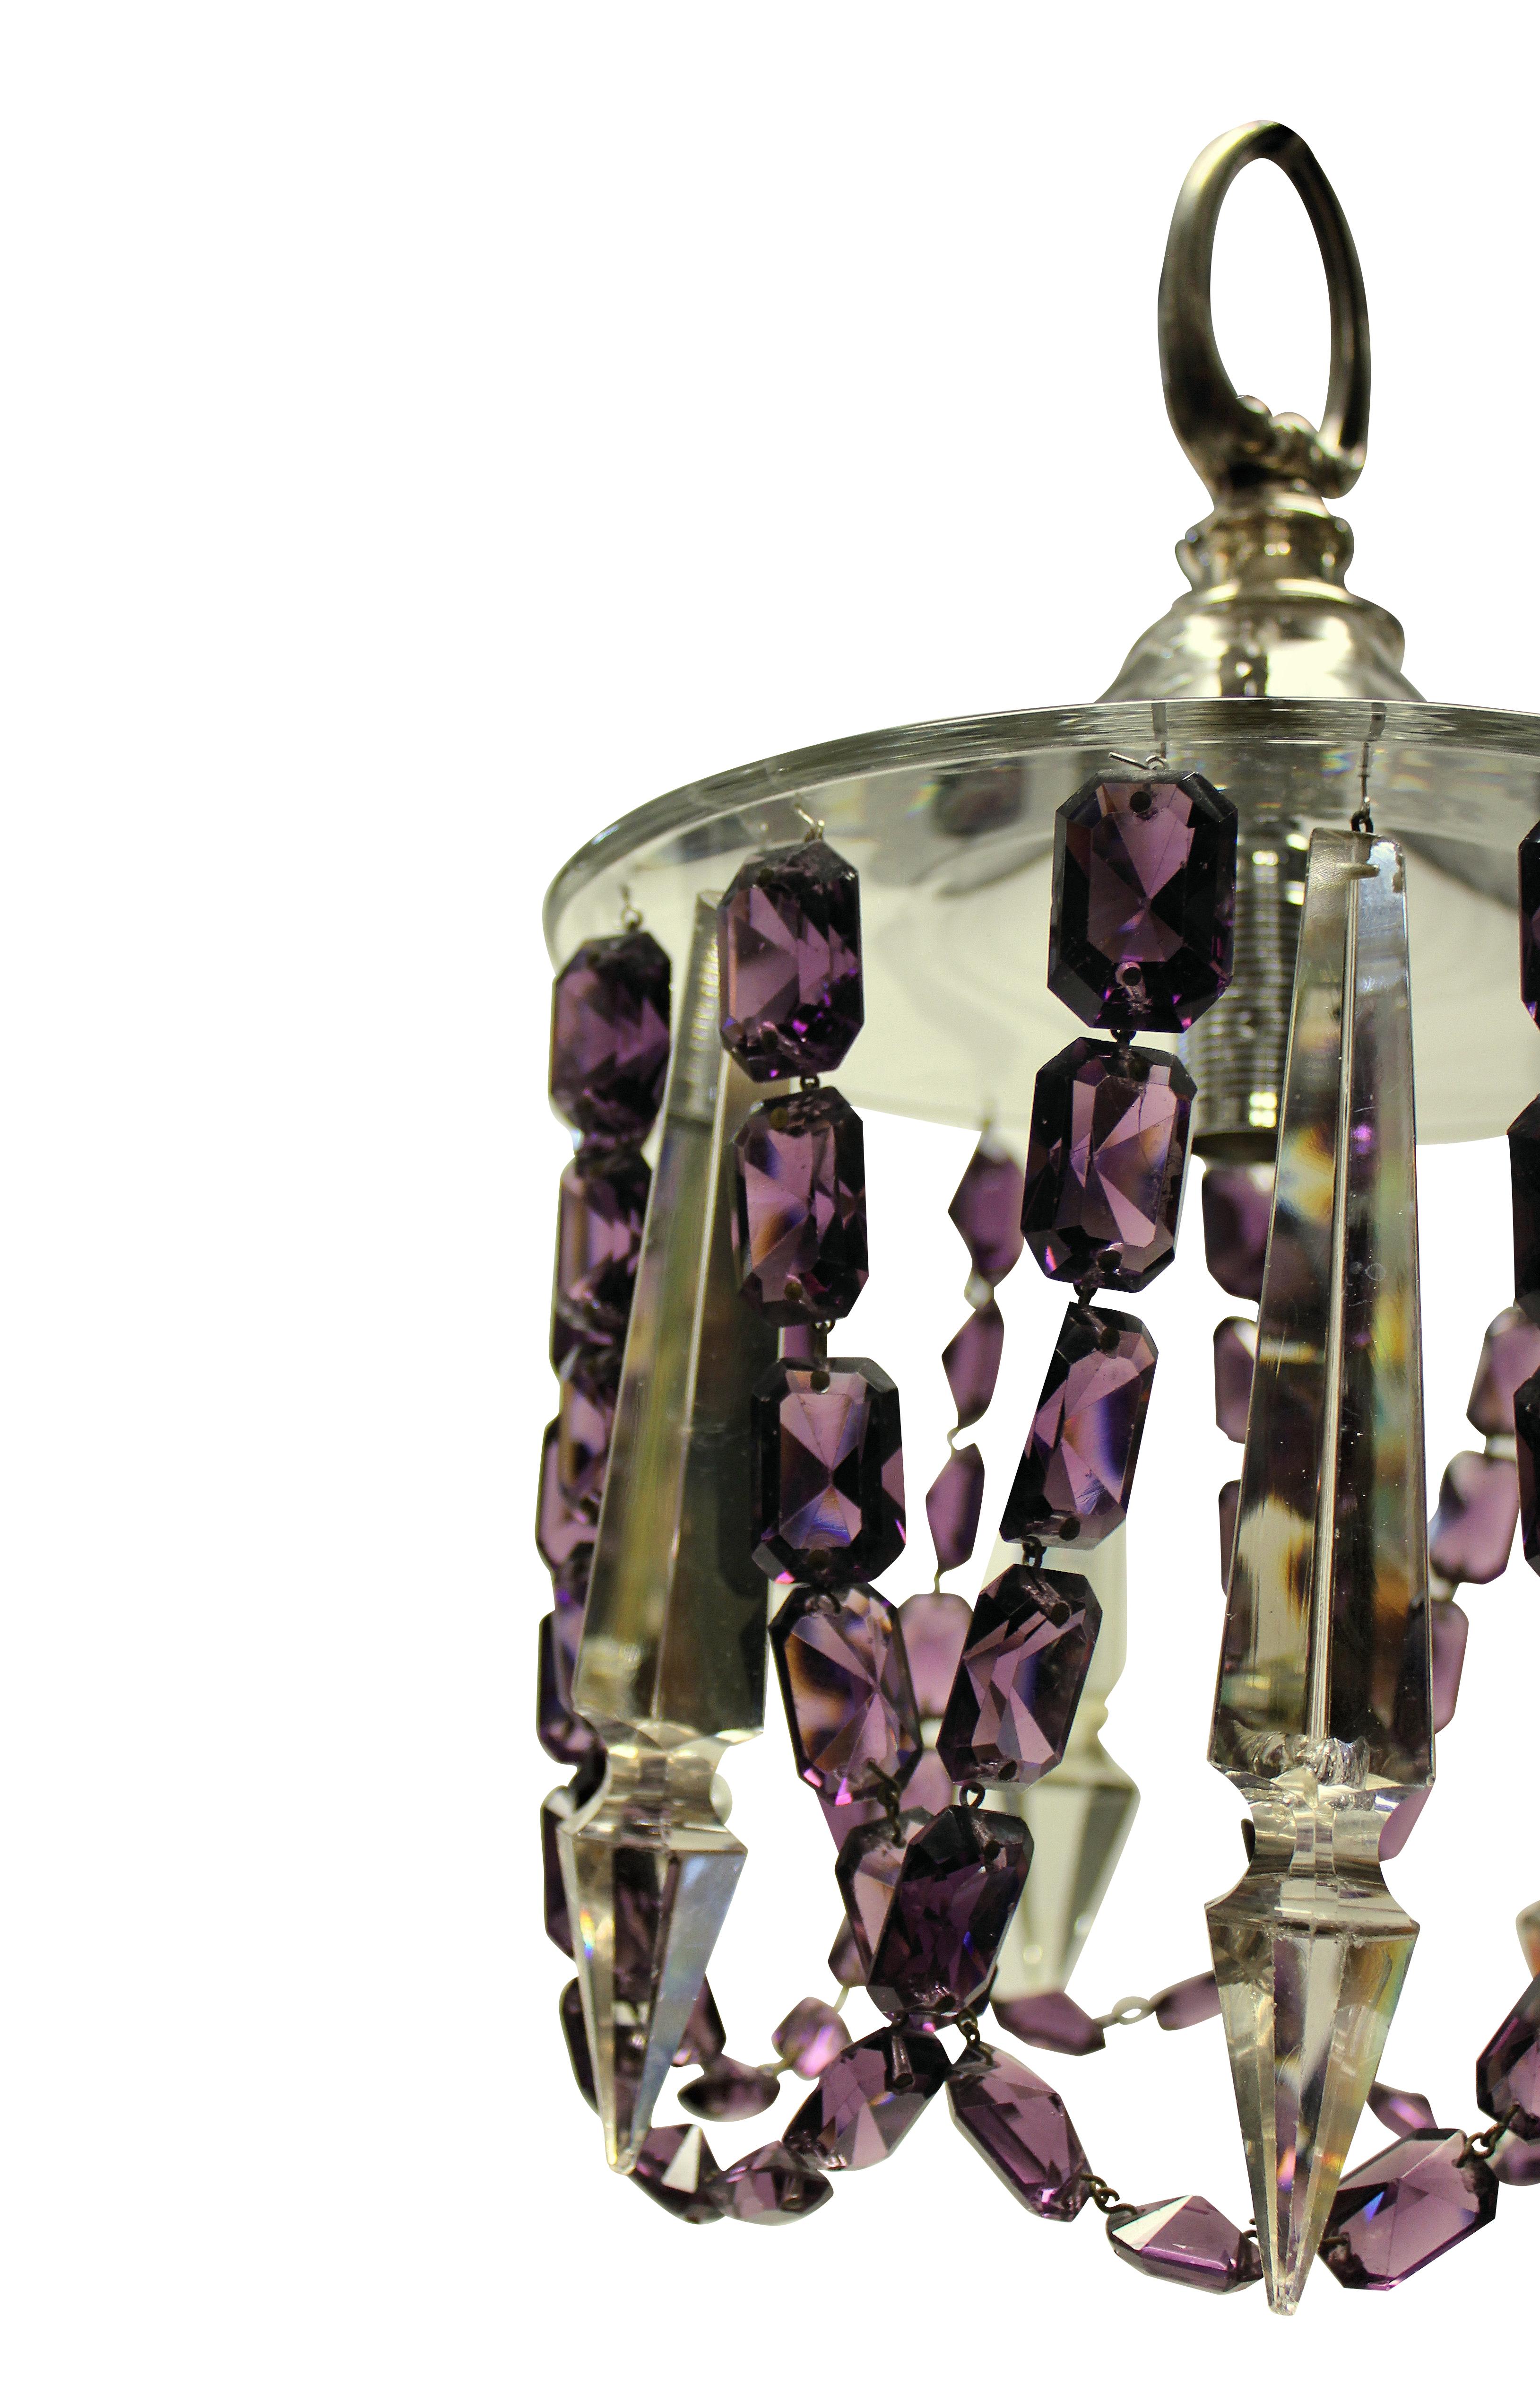 English Pair of Small Cut Glass Ceiling Lights with Amethyst Glass